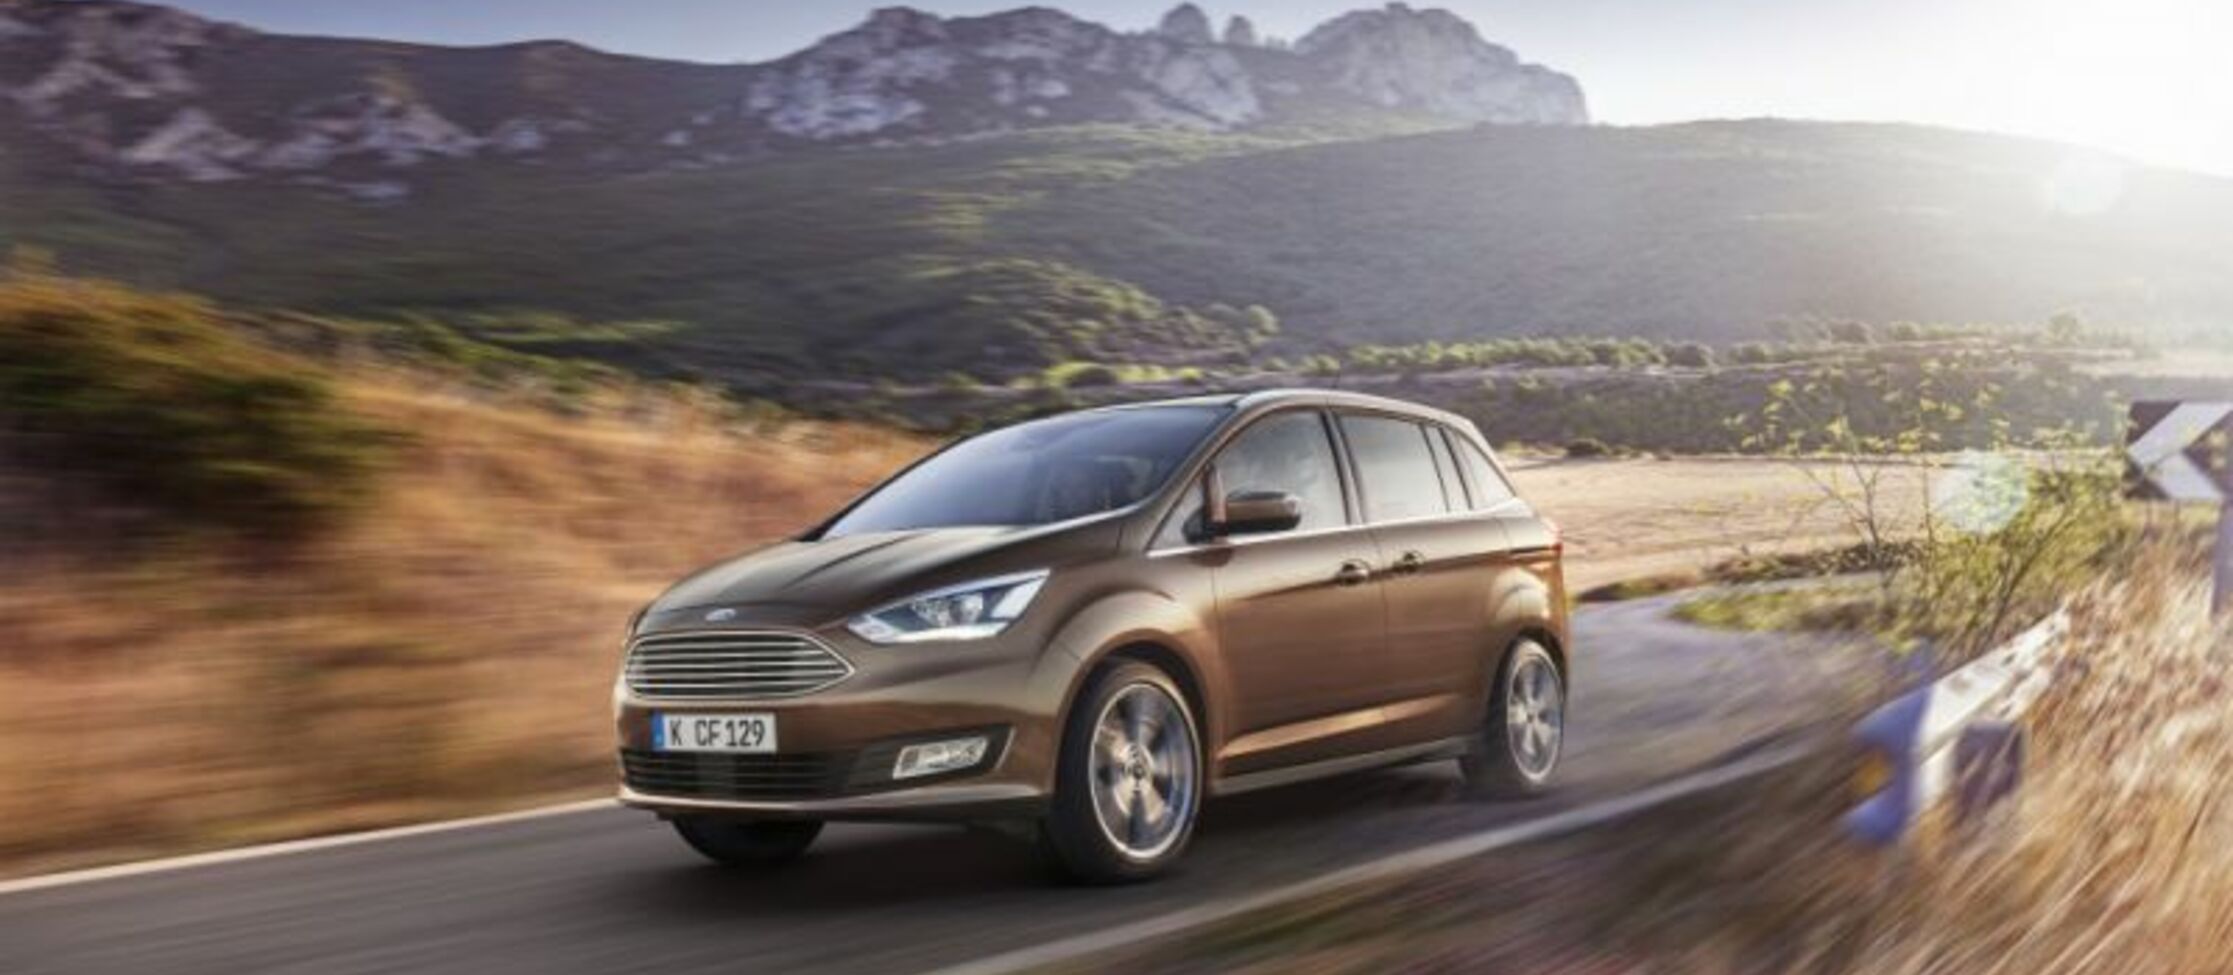 Ford Grand C-MAX (facelift 2015) 1.5 TDCi (95 Hp) 7 Seat 2015, 2016, 2017, 2018, 2019, 2020, 2021